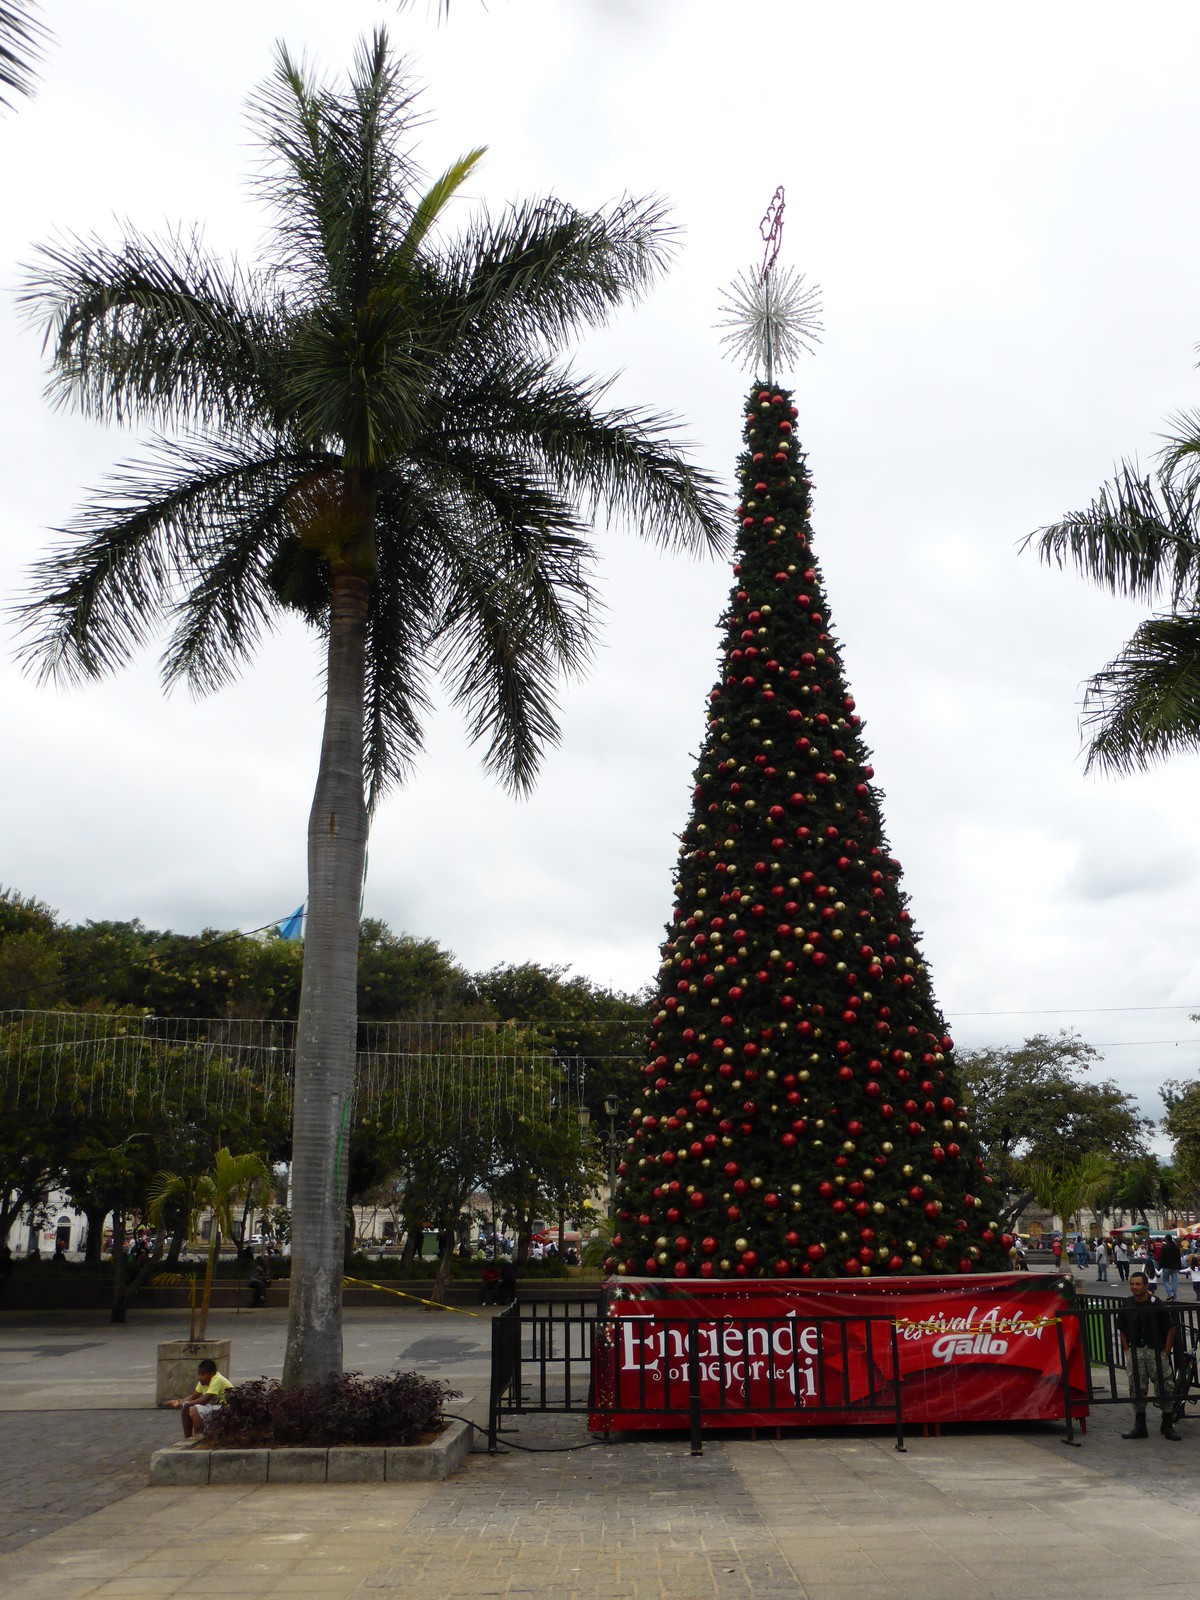 The Christmas tree in Parque Central